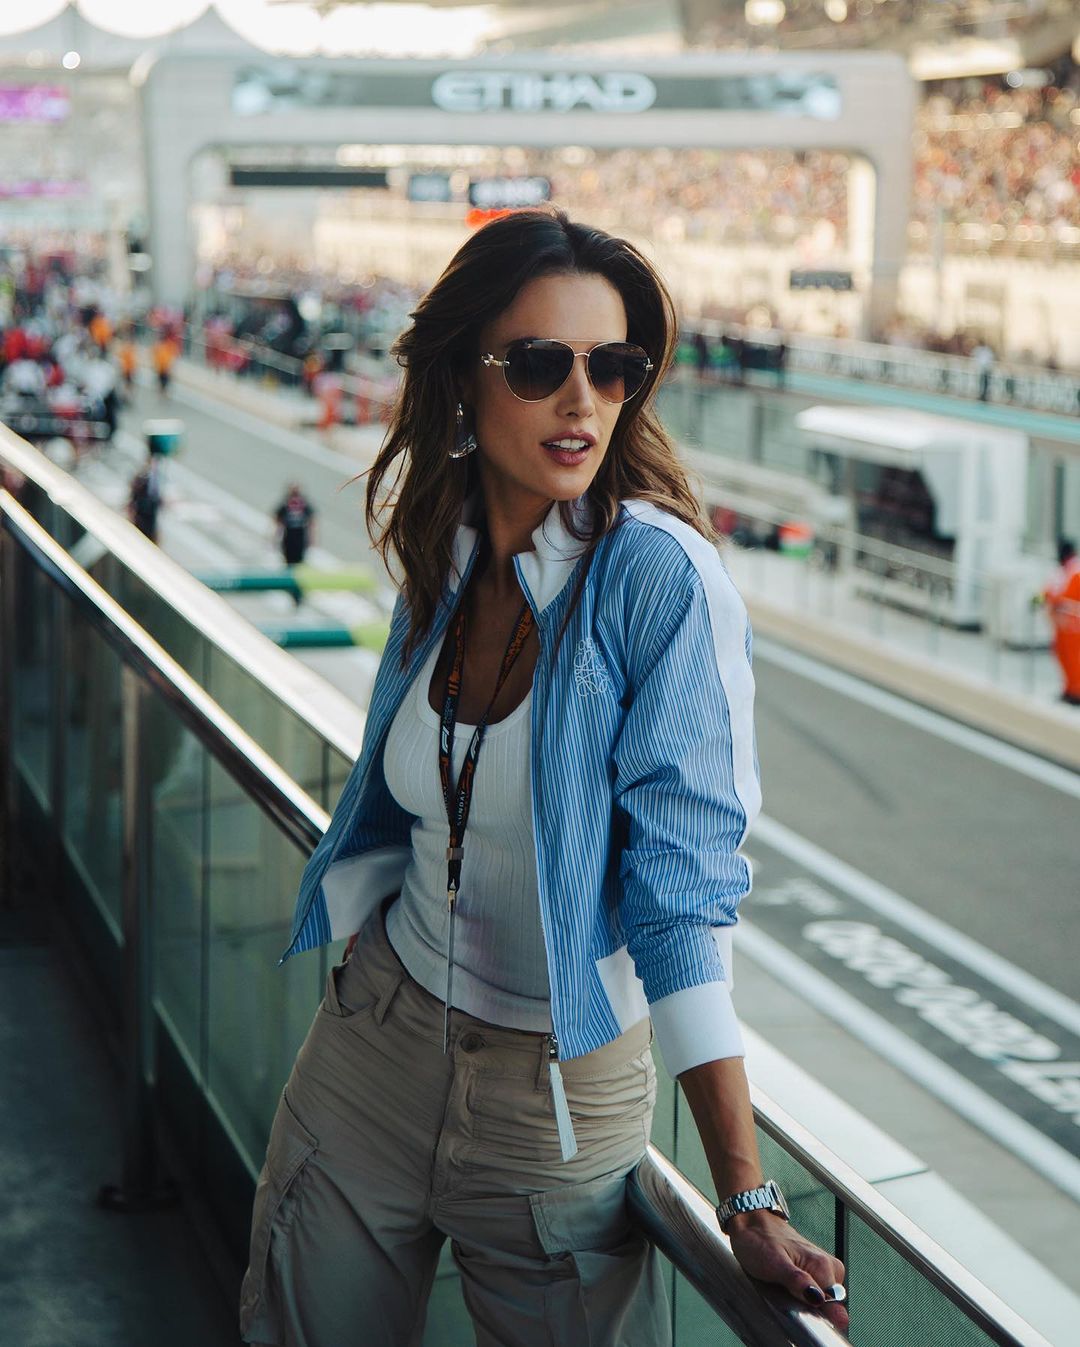 Photos n°3 : Alessandra Ambrosio is In The Fast Lane!